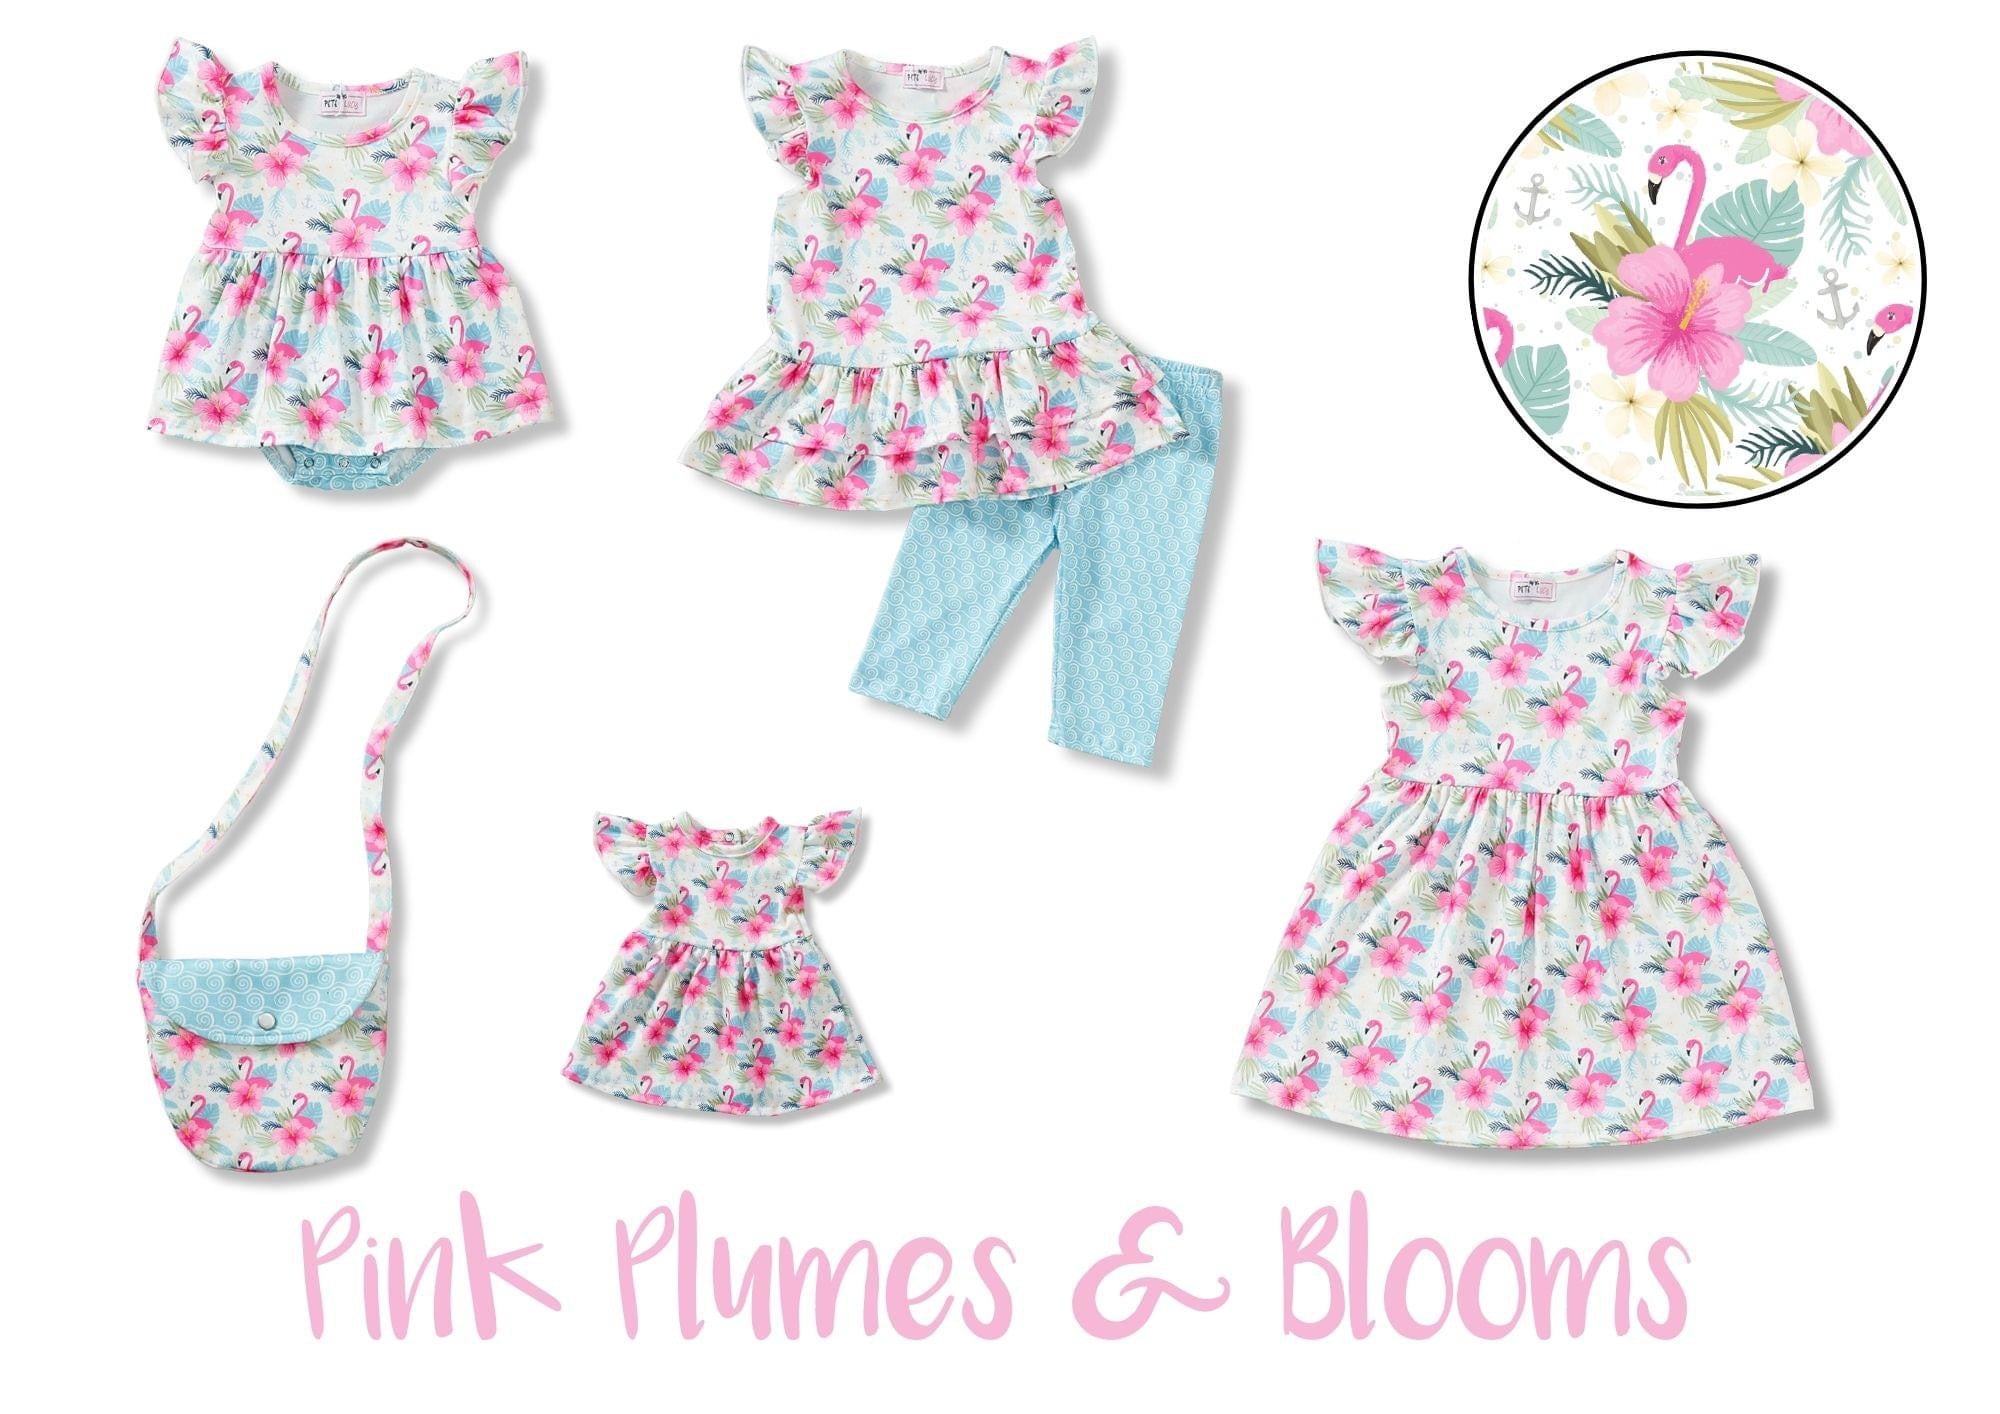 Pink Plumes & Blooms Dress by Pete and Lucy